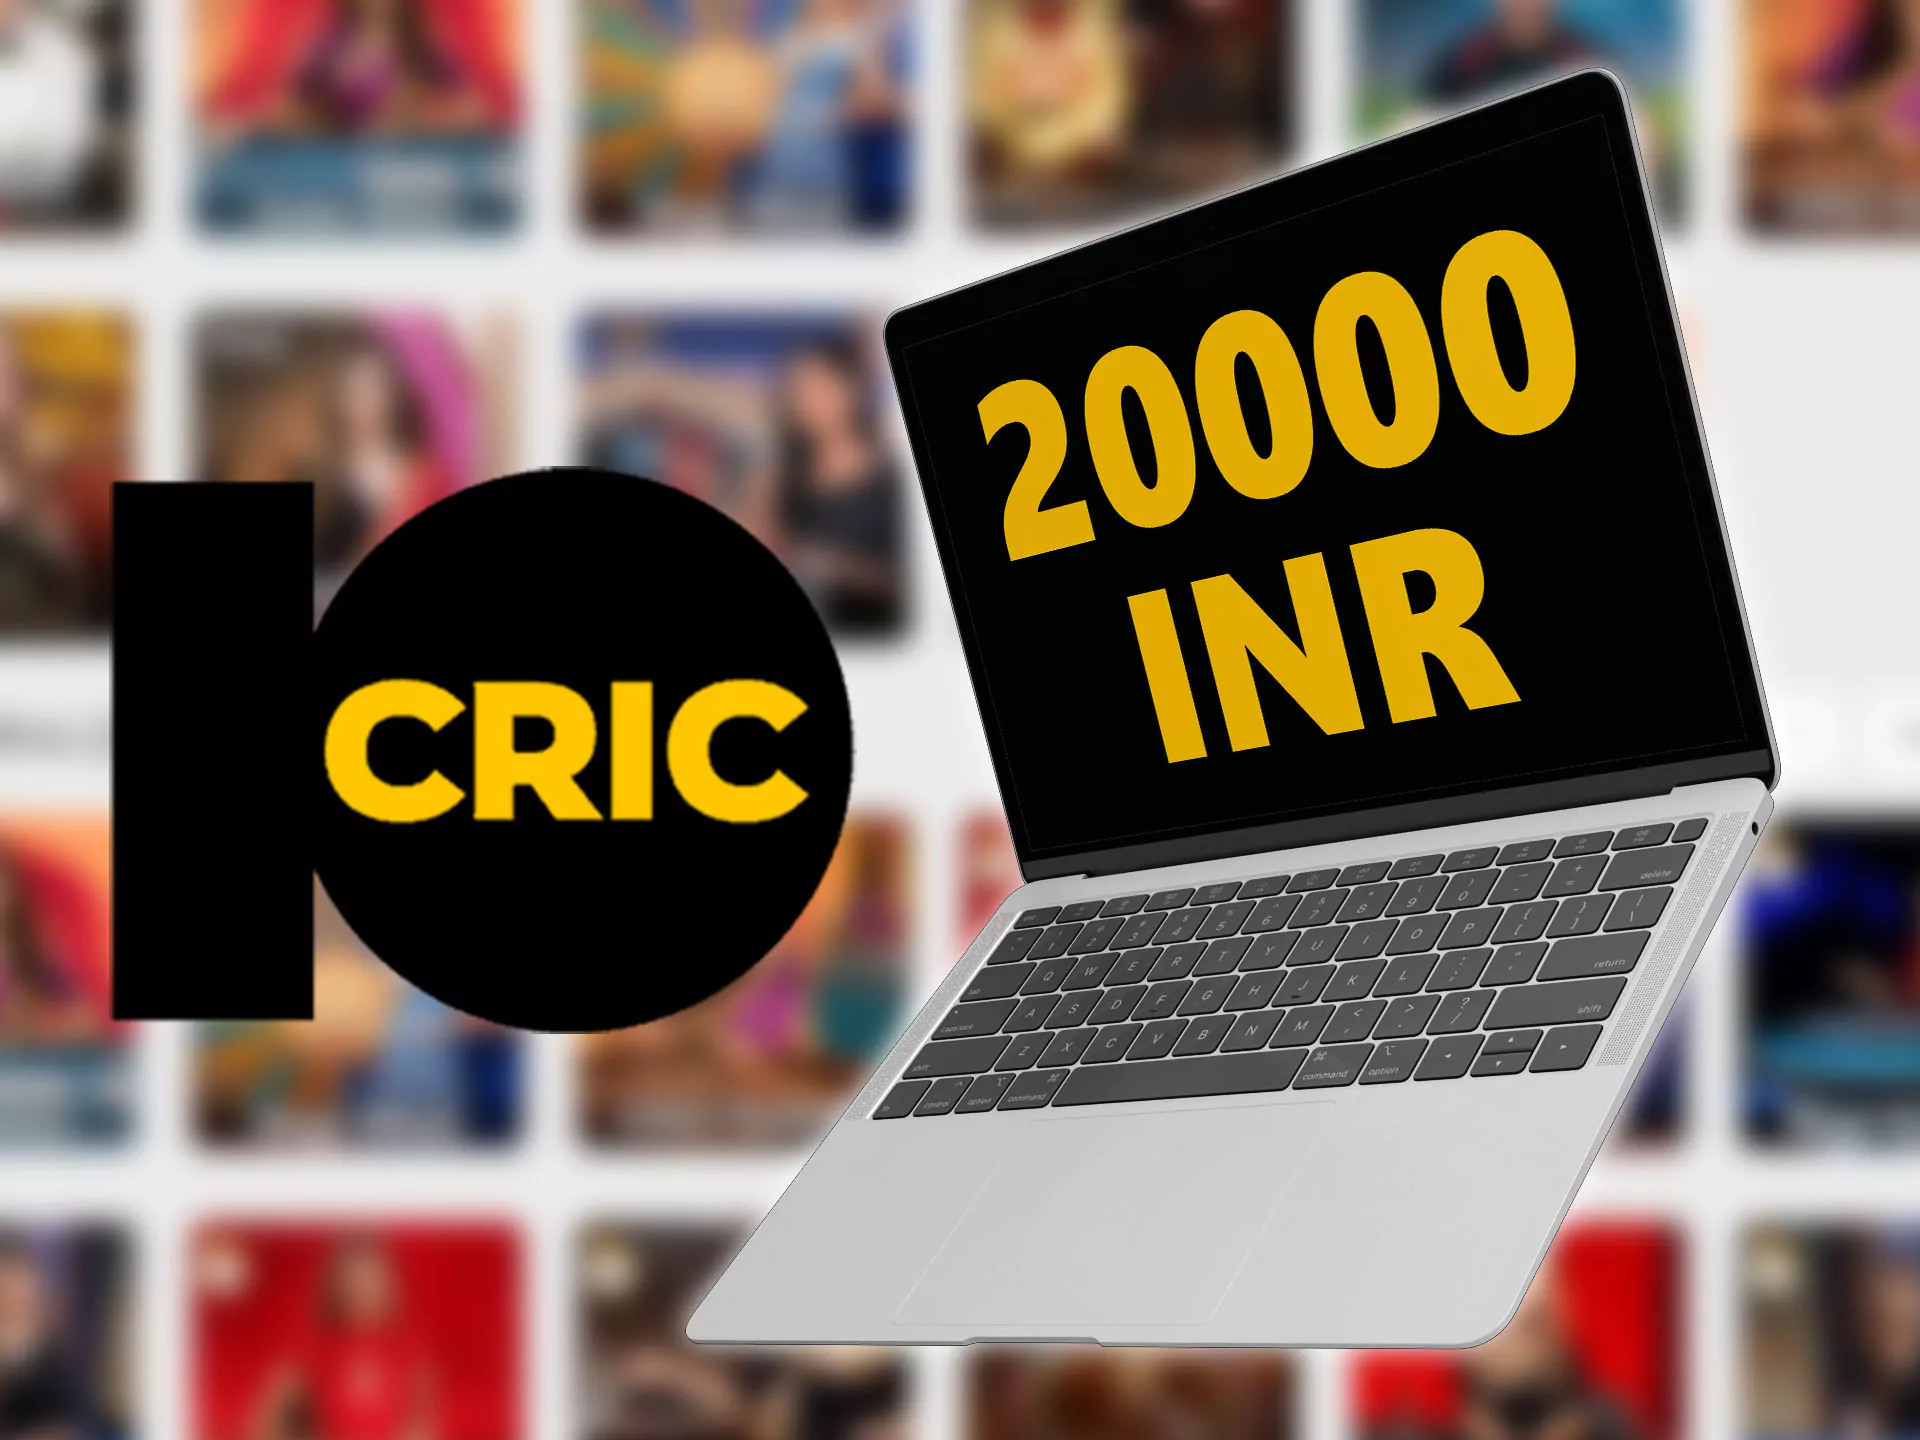 10Cric casino offers lucrative bonuses for its players from India.